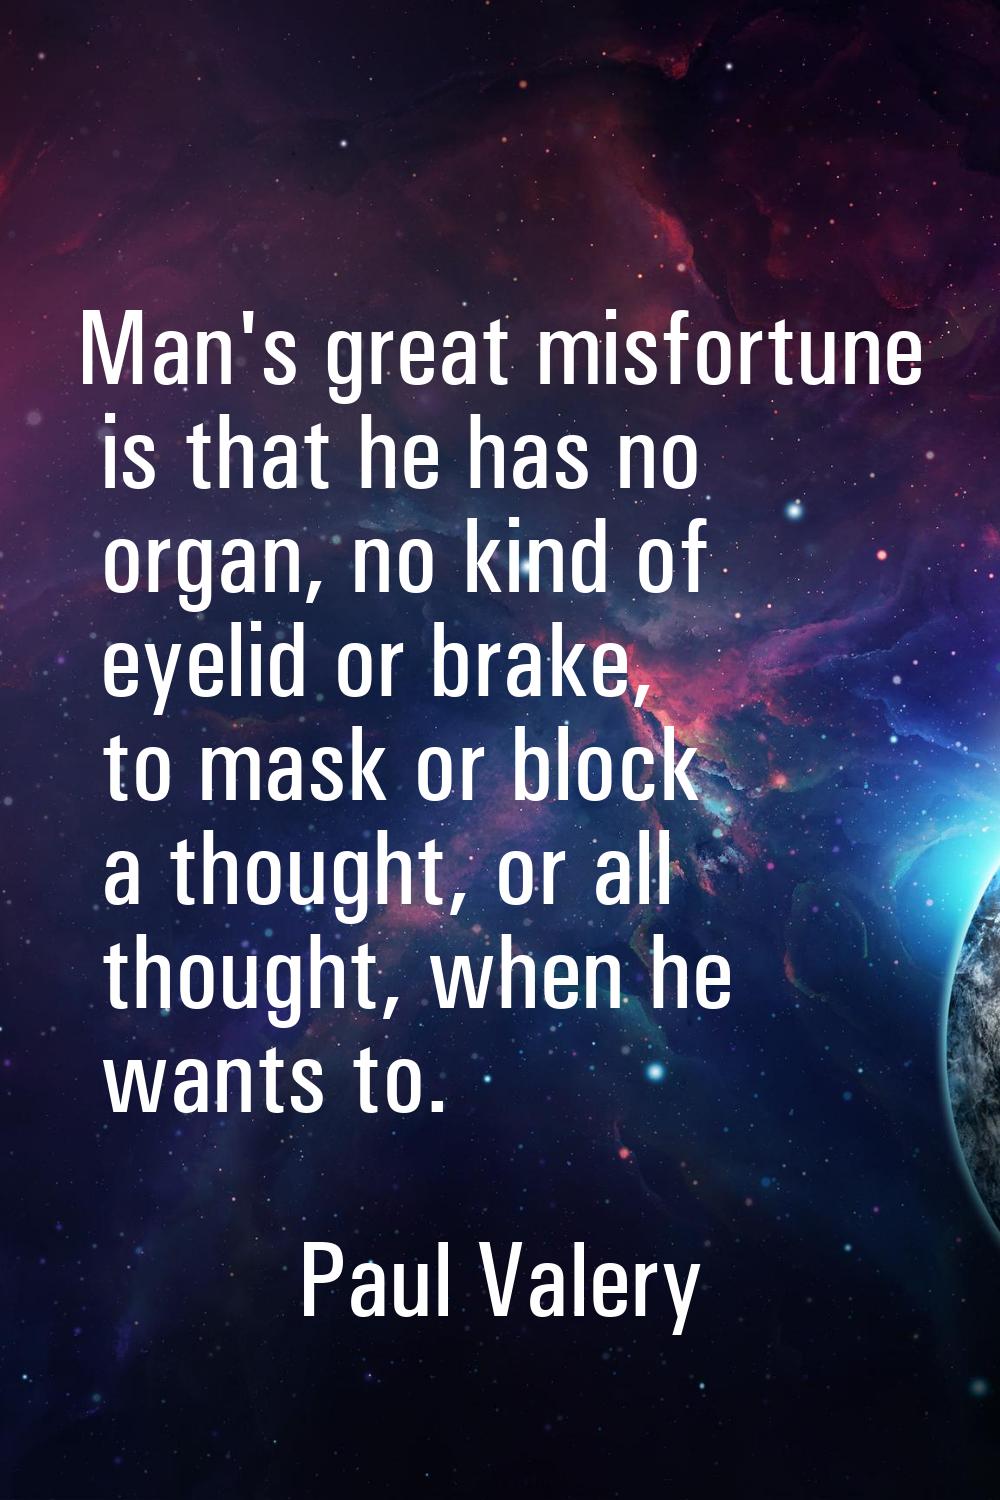 Man's great misfortune is that he has no organ, no kind of eyelid or brake, to mask or block a thou